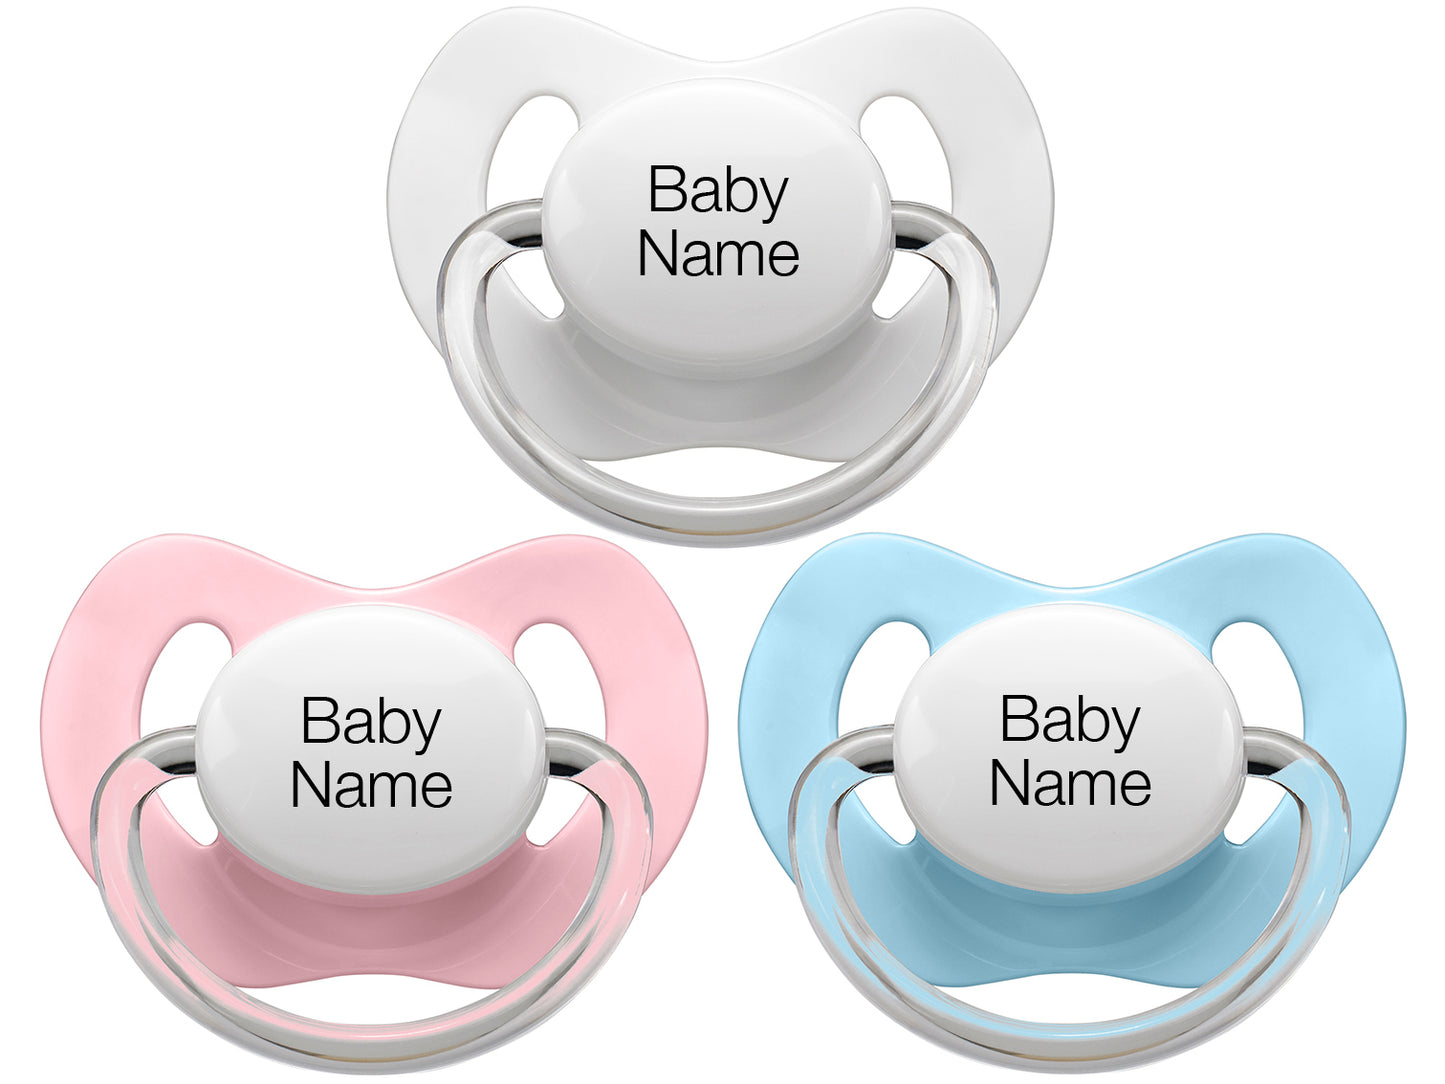 Personalised Pacifiers 3 pcs. Mixed colors